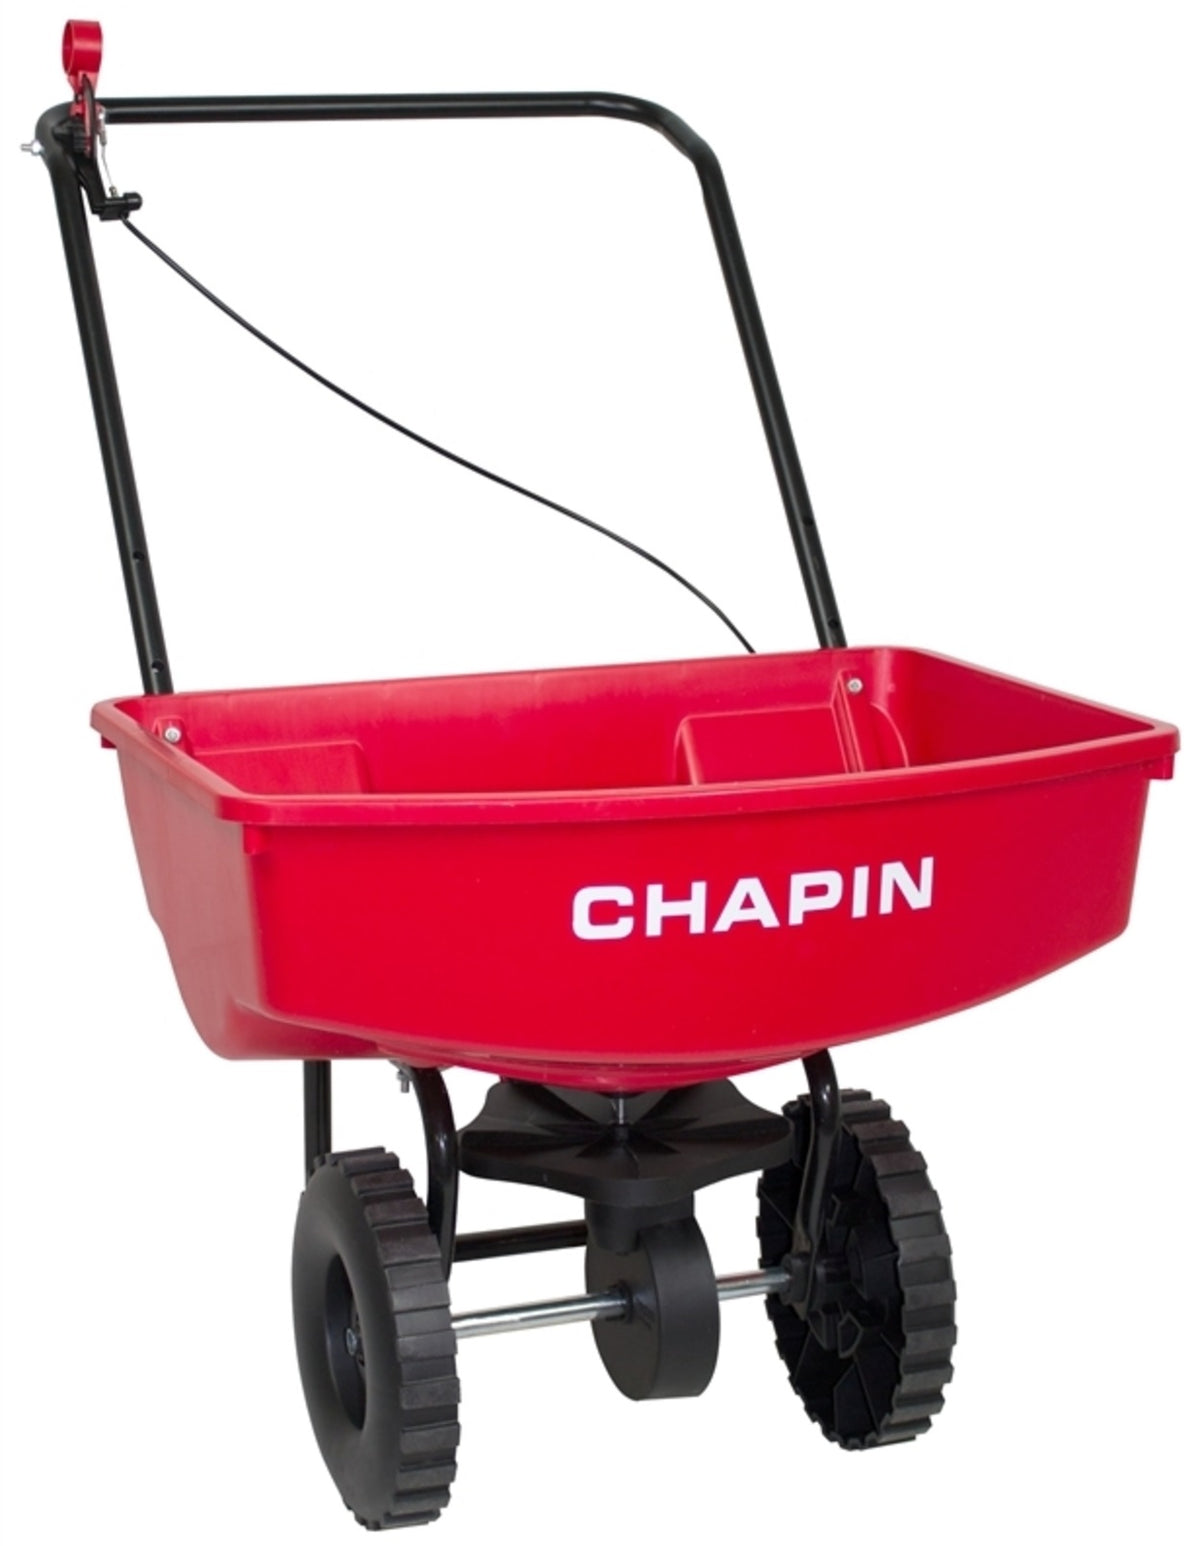 Buy chapin 8000a - Online store for lawn & garden tools, spreaders in USA, on sale, low price, discount deals, coupon code